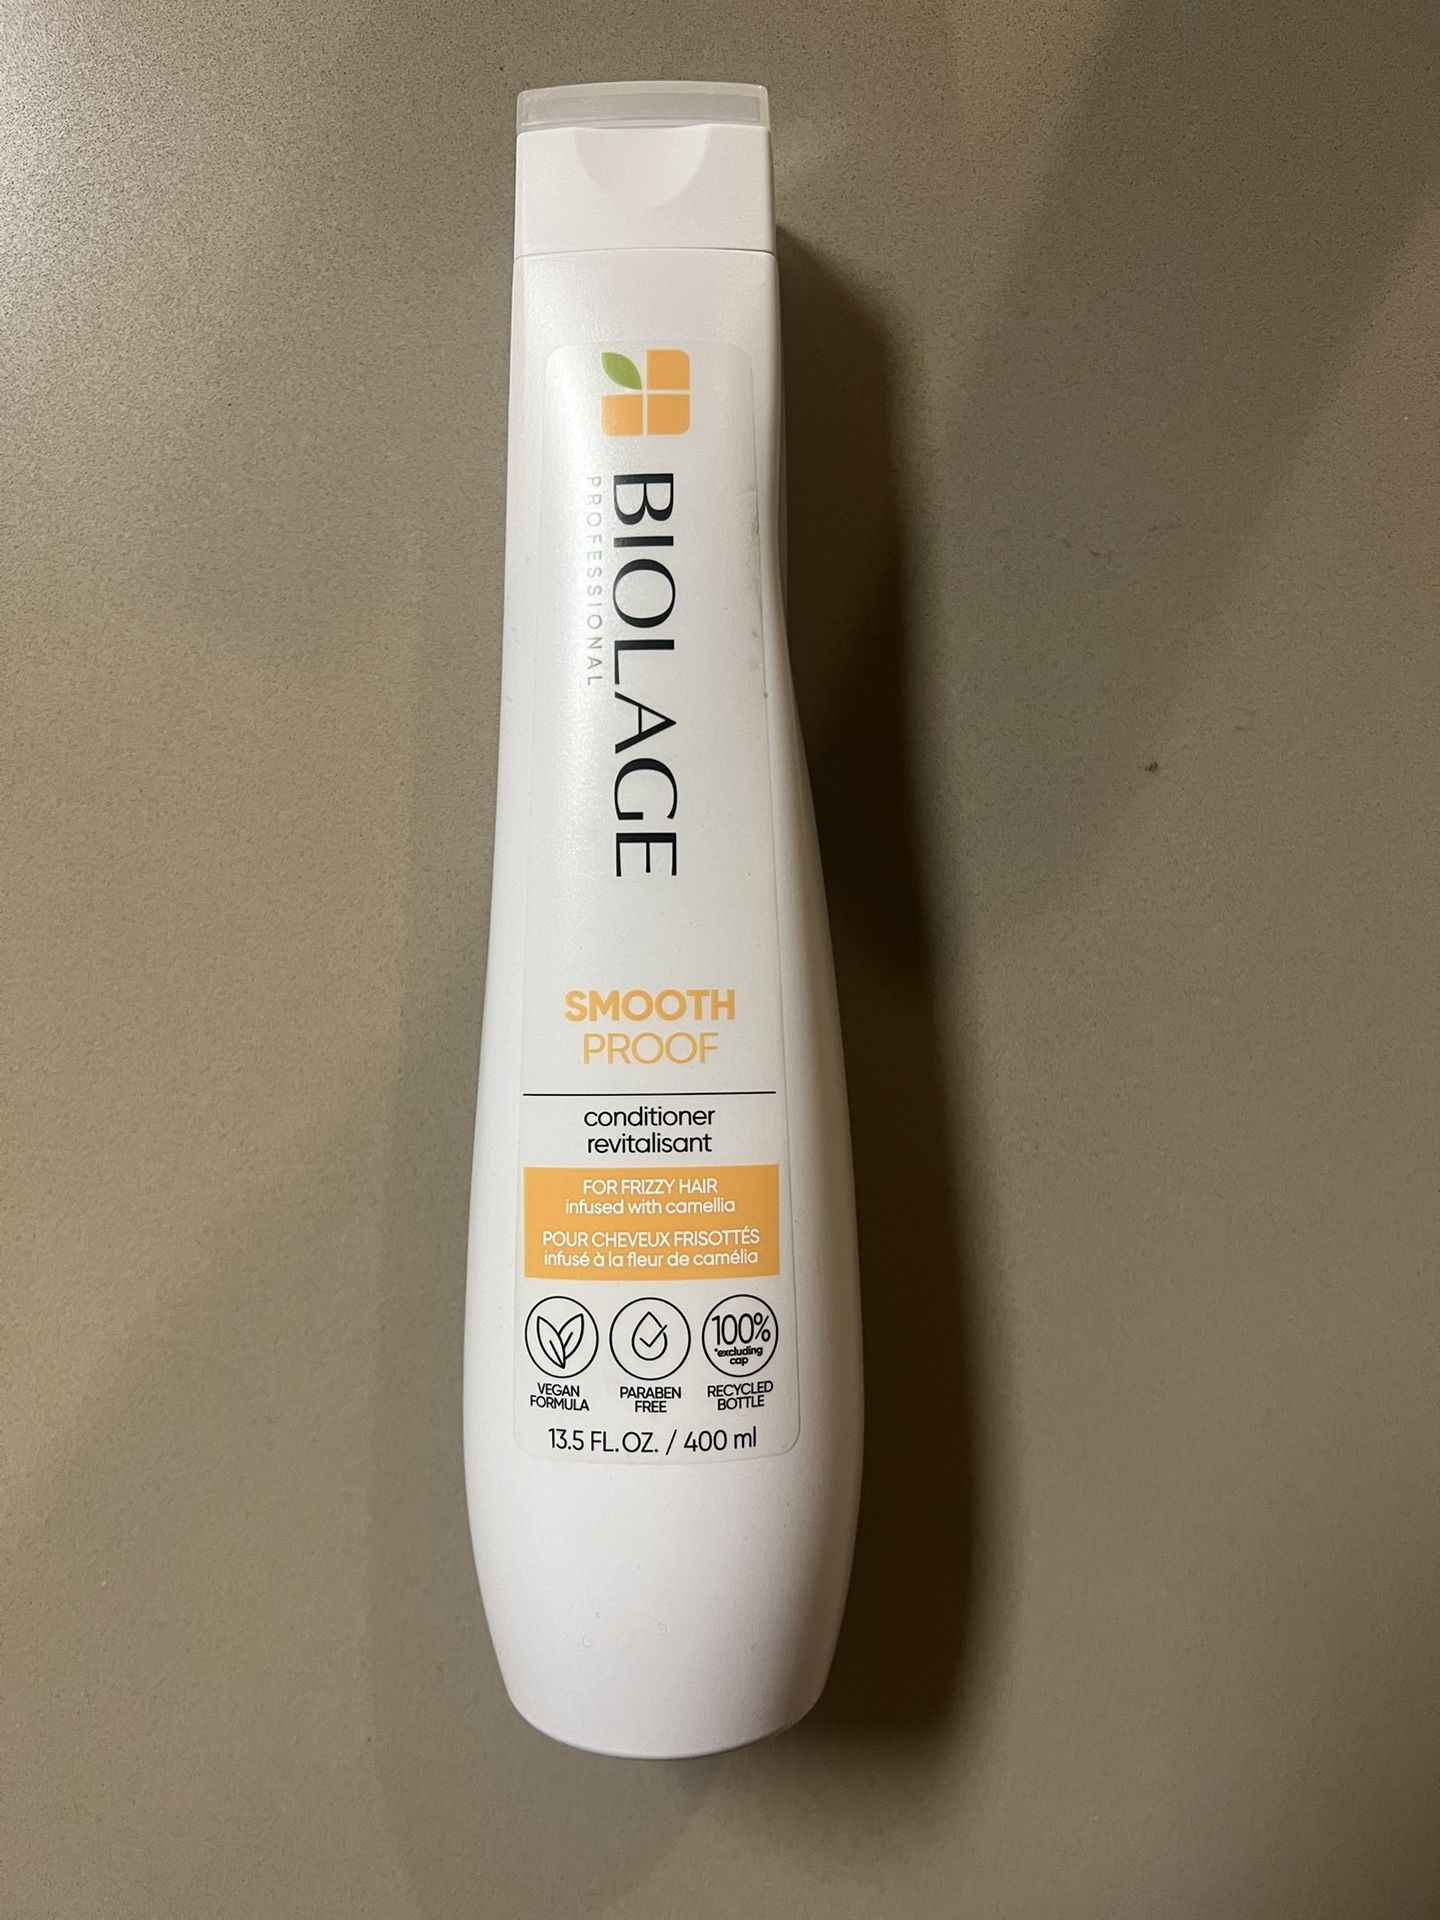 Bootlace Smooth Proof conditioner 400ml $8